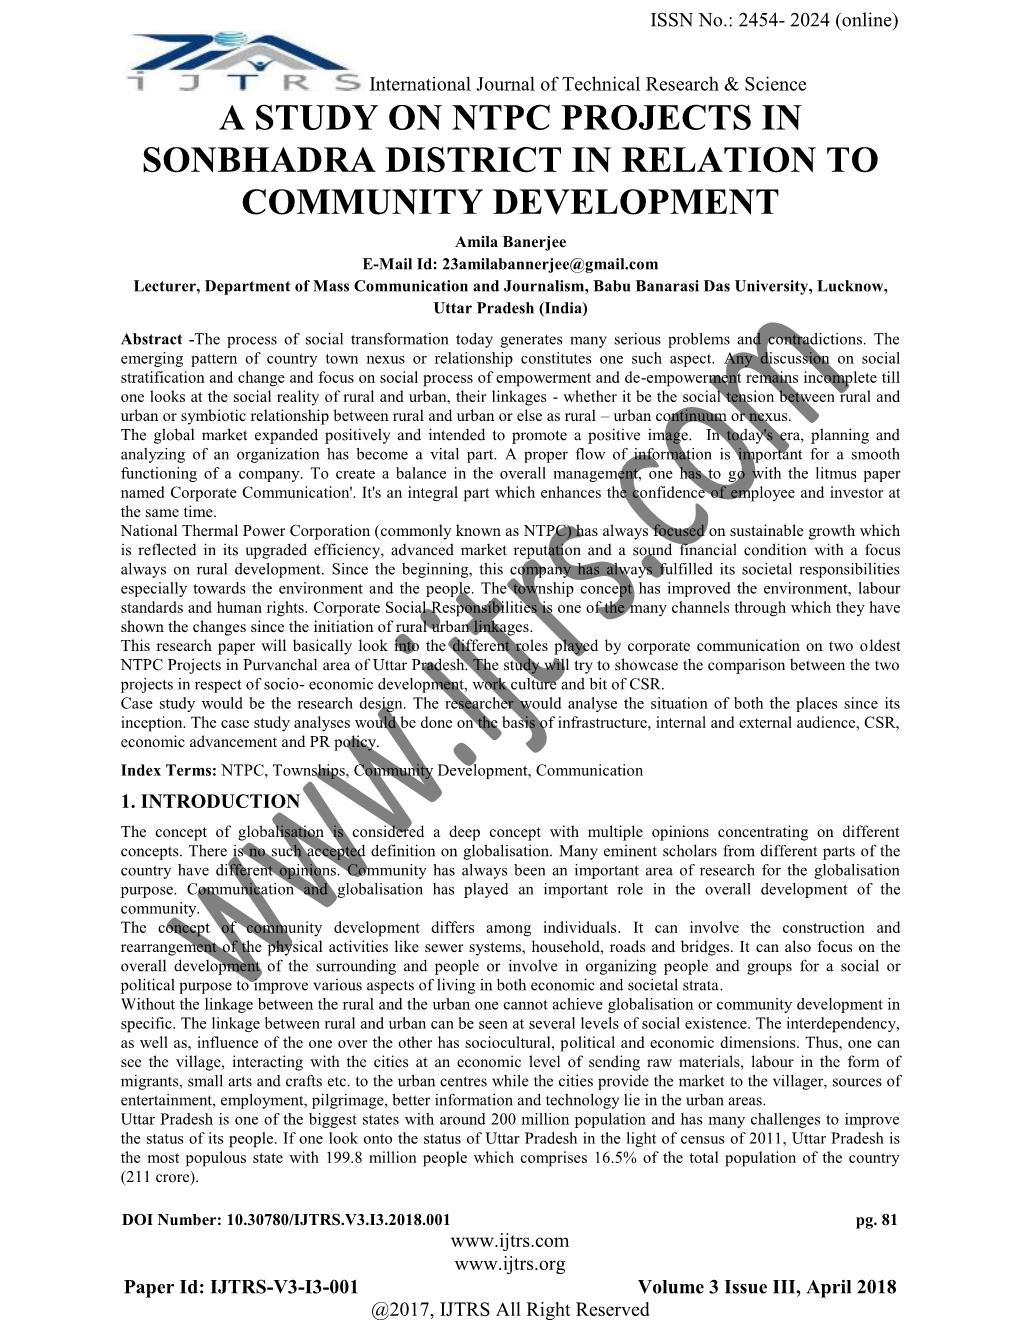 A Study on Ntpc Projects in Sonbhadra District in Relation to Community Development